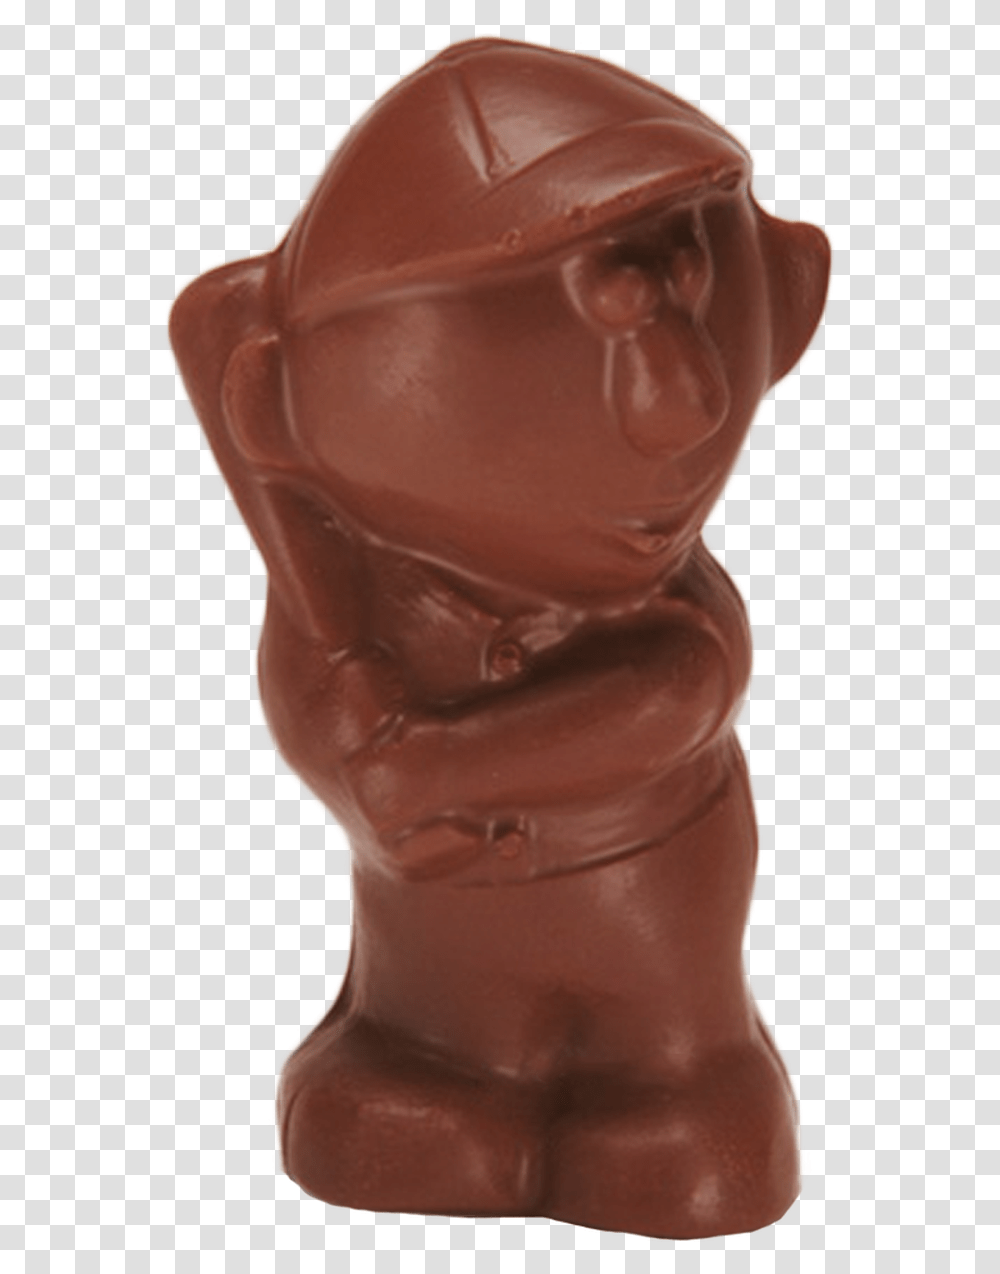 Chocolate Baseball Player Chocolate, Sweets, Food, Confectionery, Torso Transparent Png